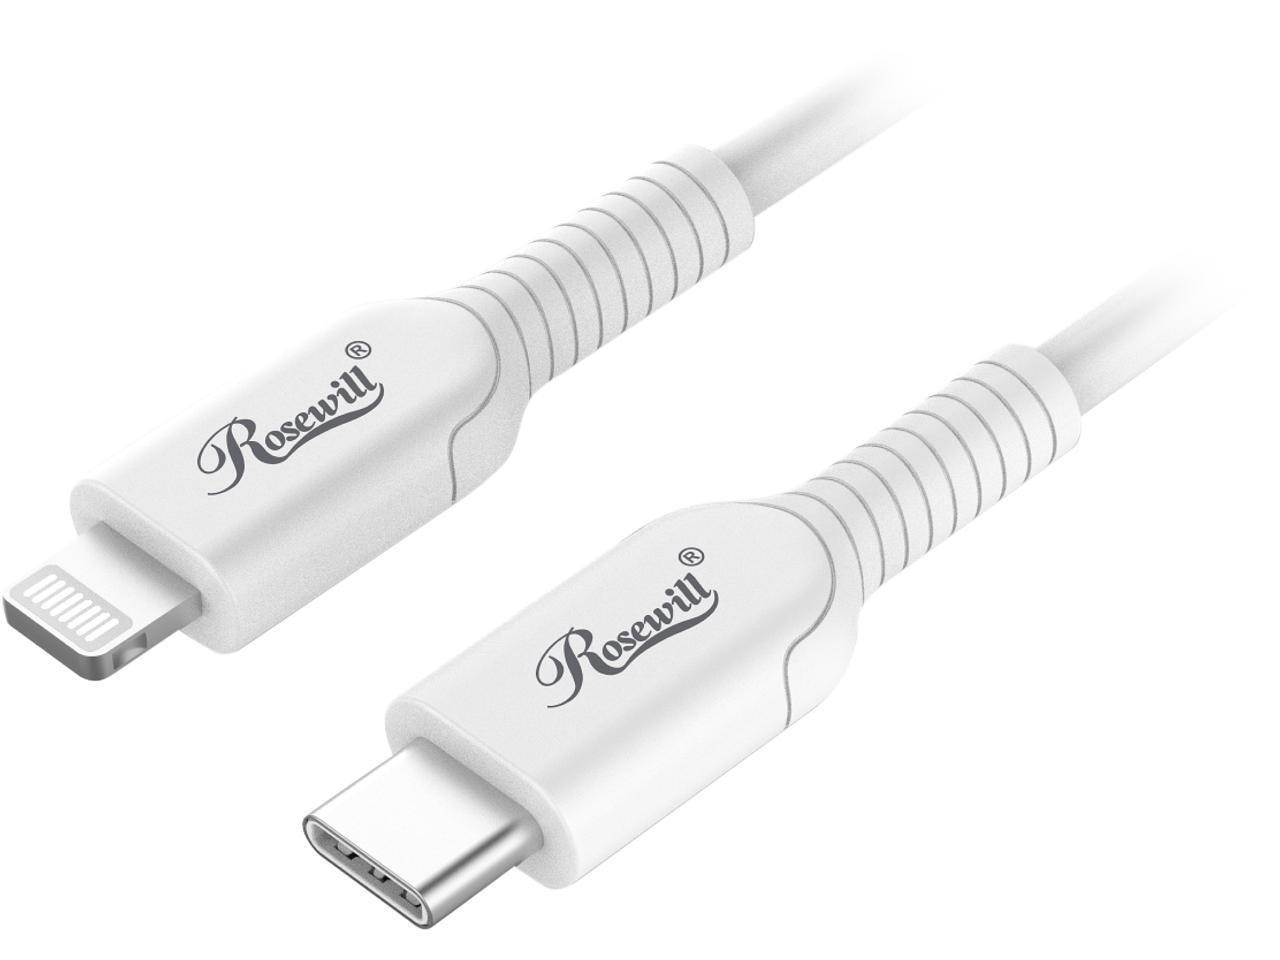 Rosewill iPhone Fast Charger Cable